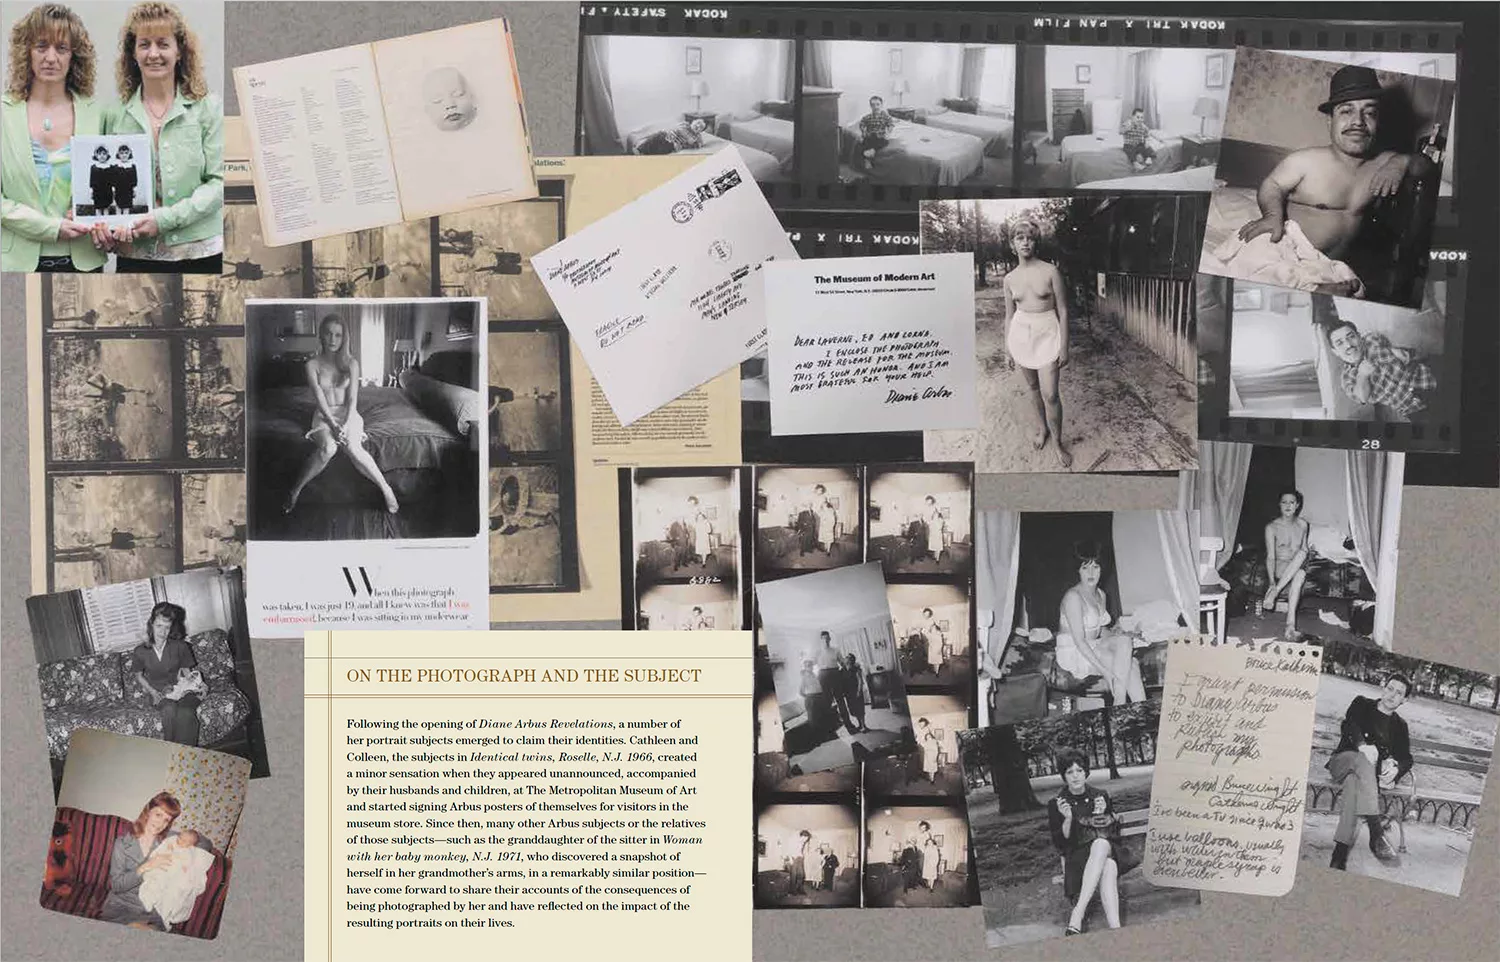 Internal collage layout from Diane Arbus Documents book on Diane Arbus photographs with twins image